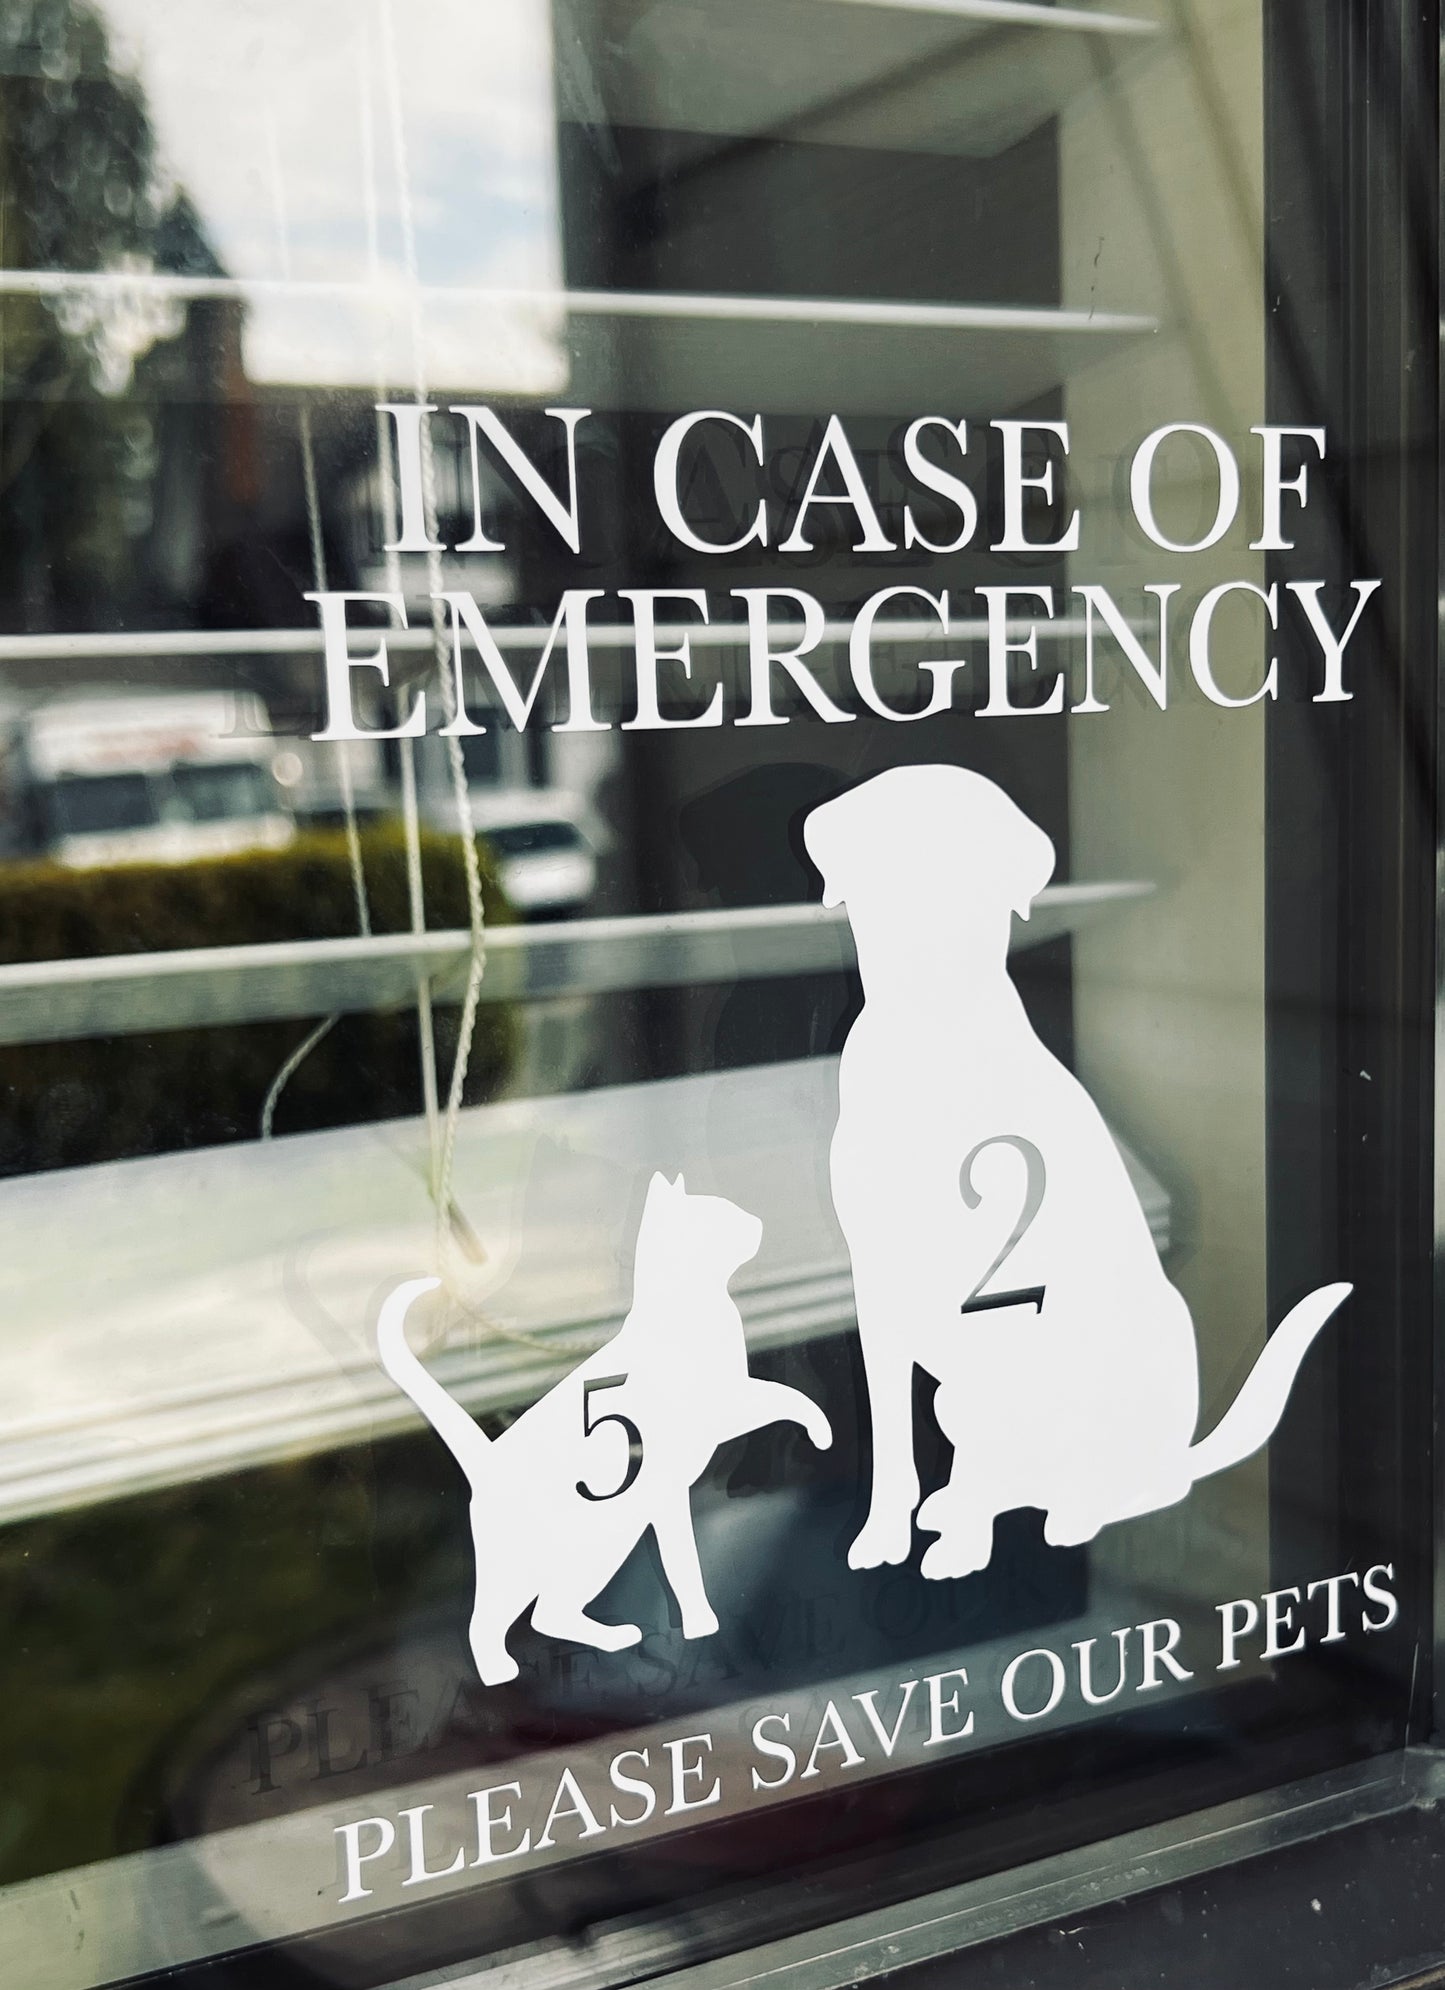 Save our pets decal